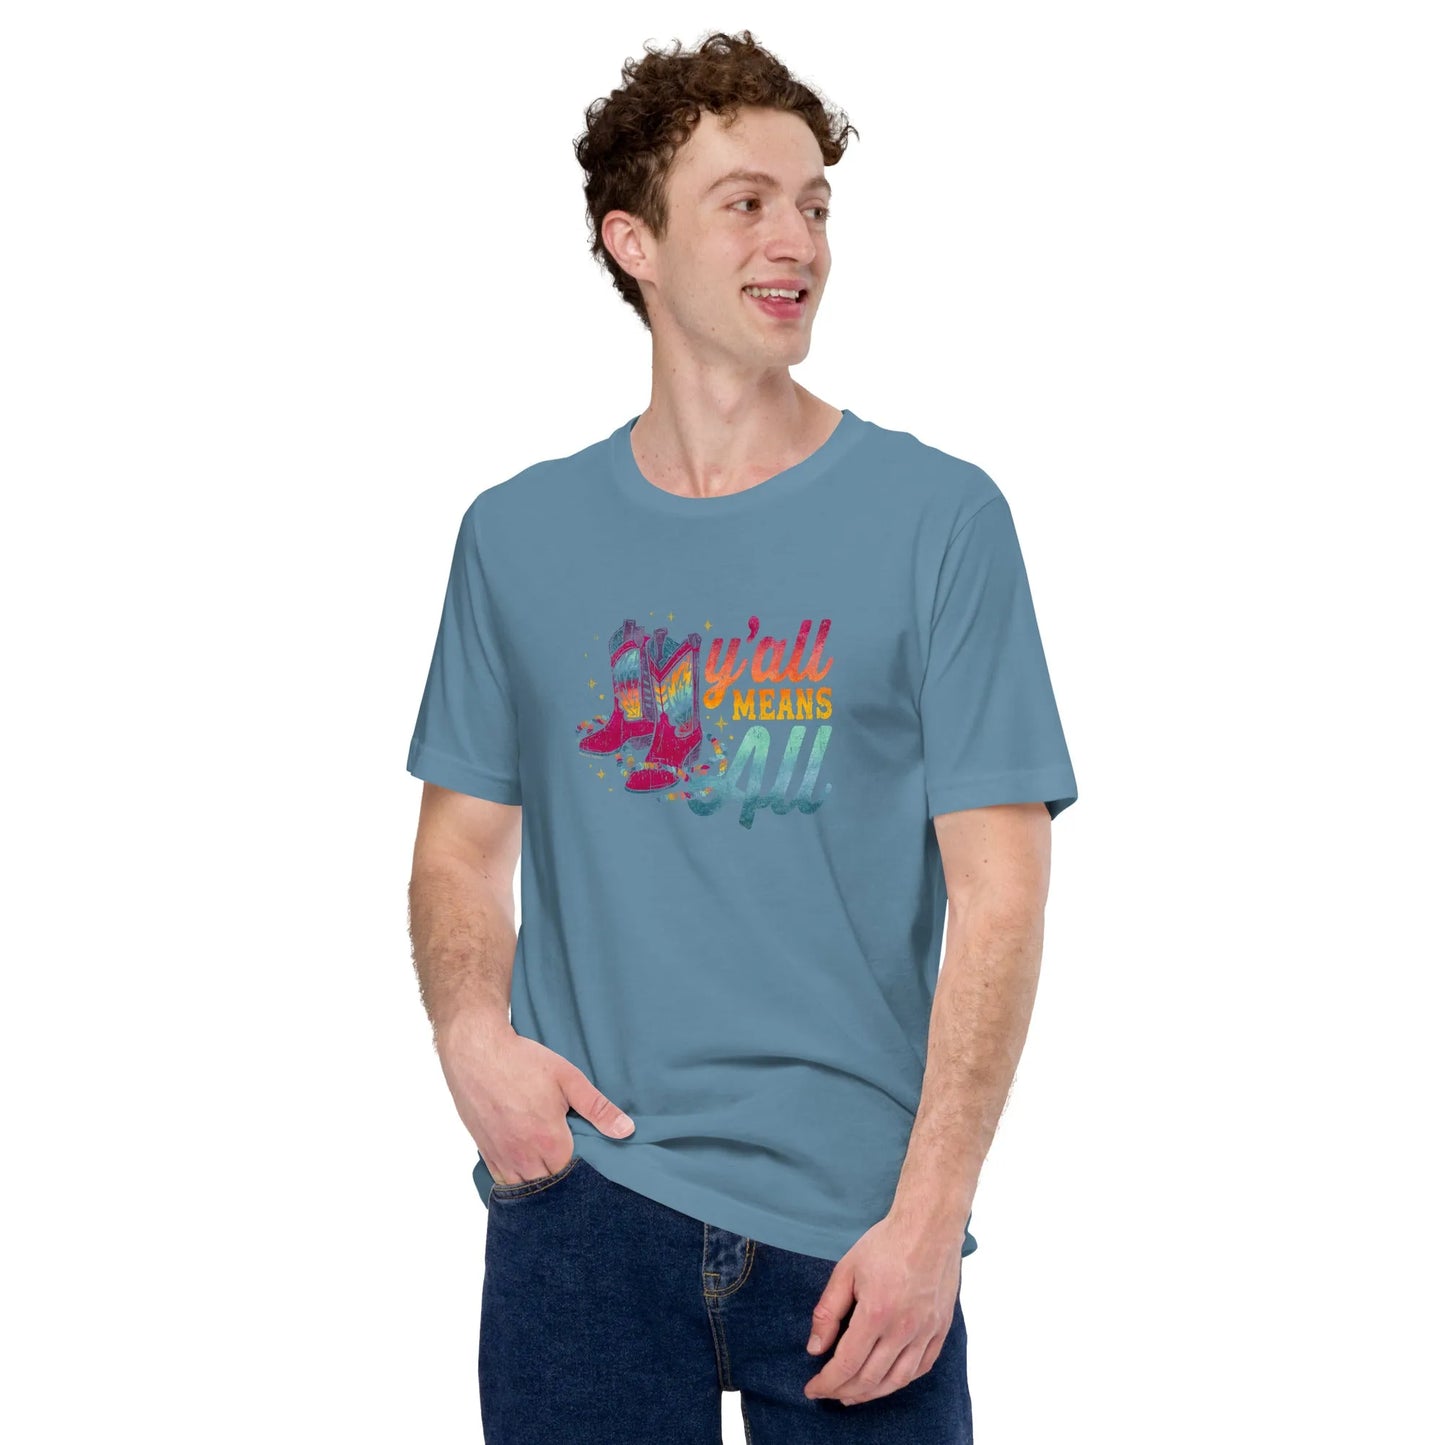 Y’all Means All Rainbow Boots Unisex T-Shirt